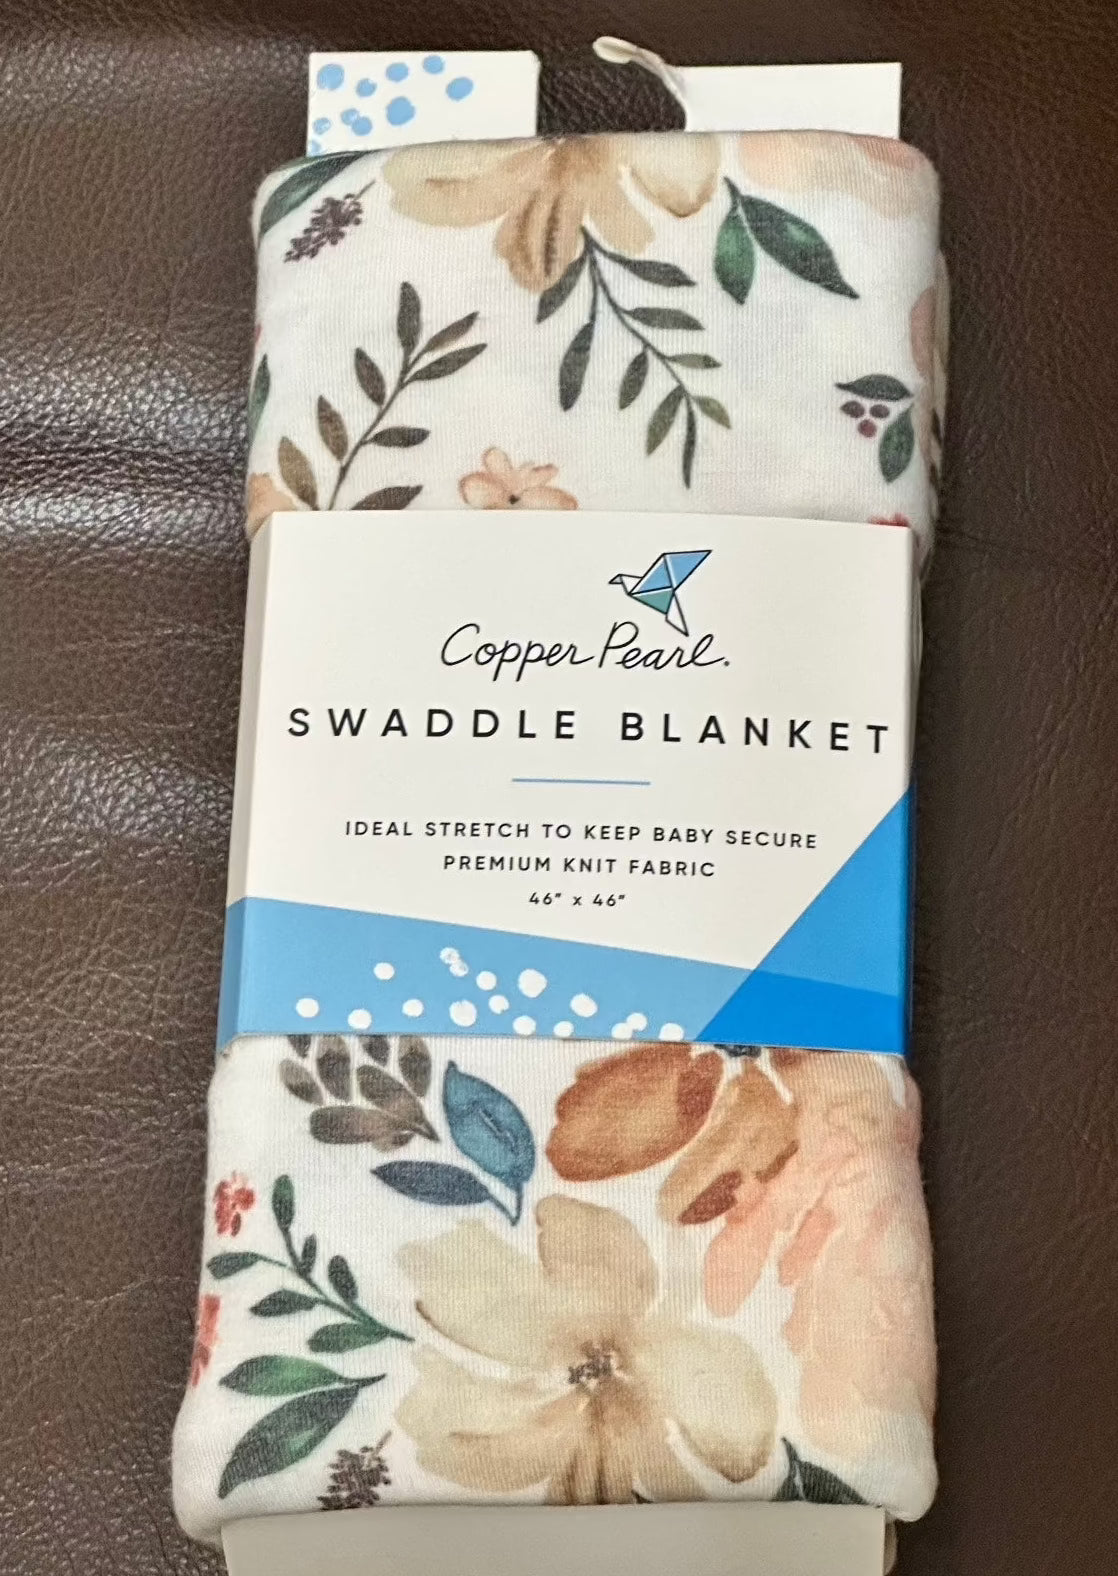 autumn Knit Swaddle Blanket by Copper Pearl Carolina Baby aco Baby